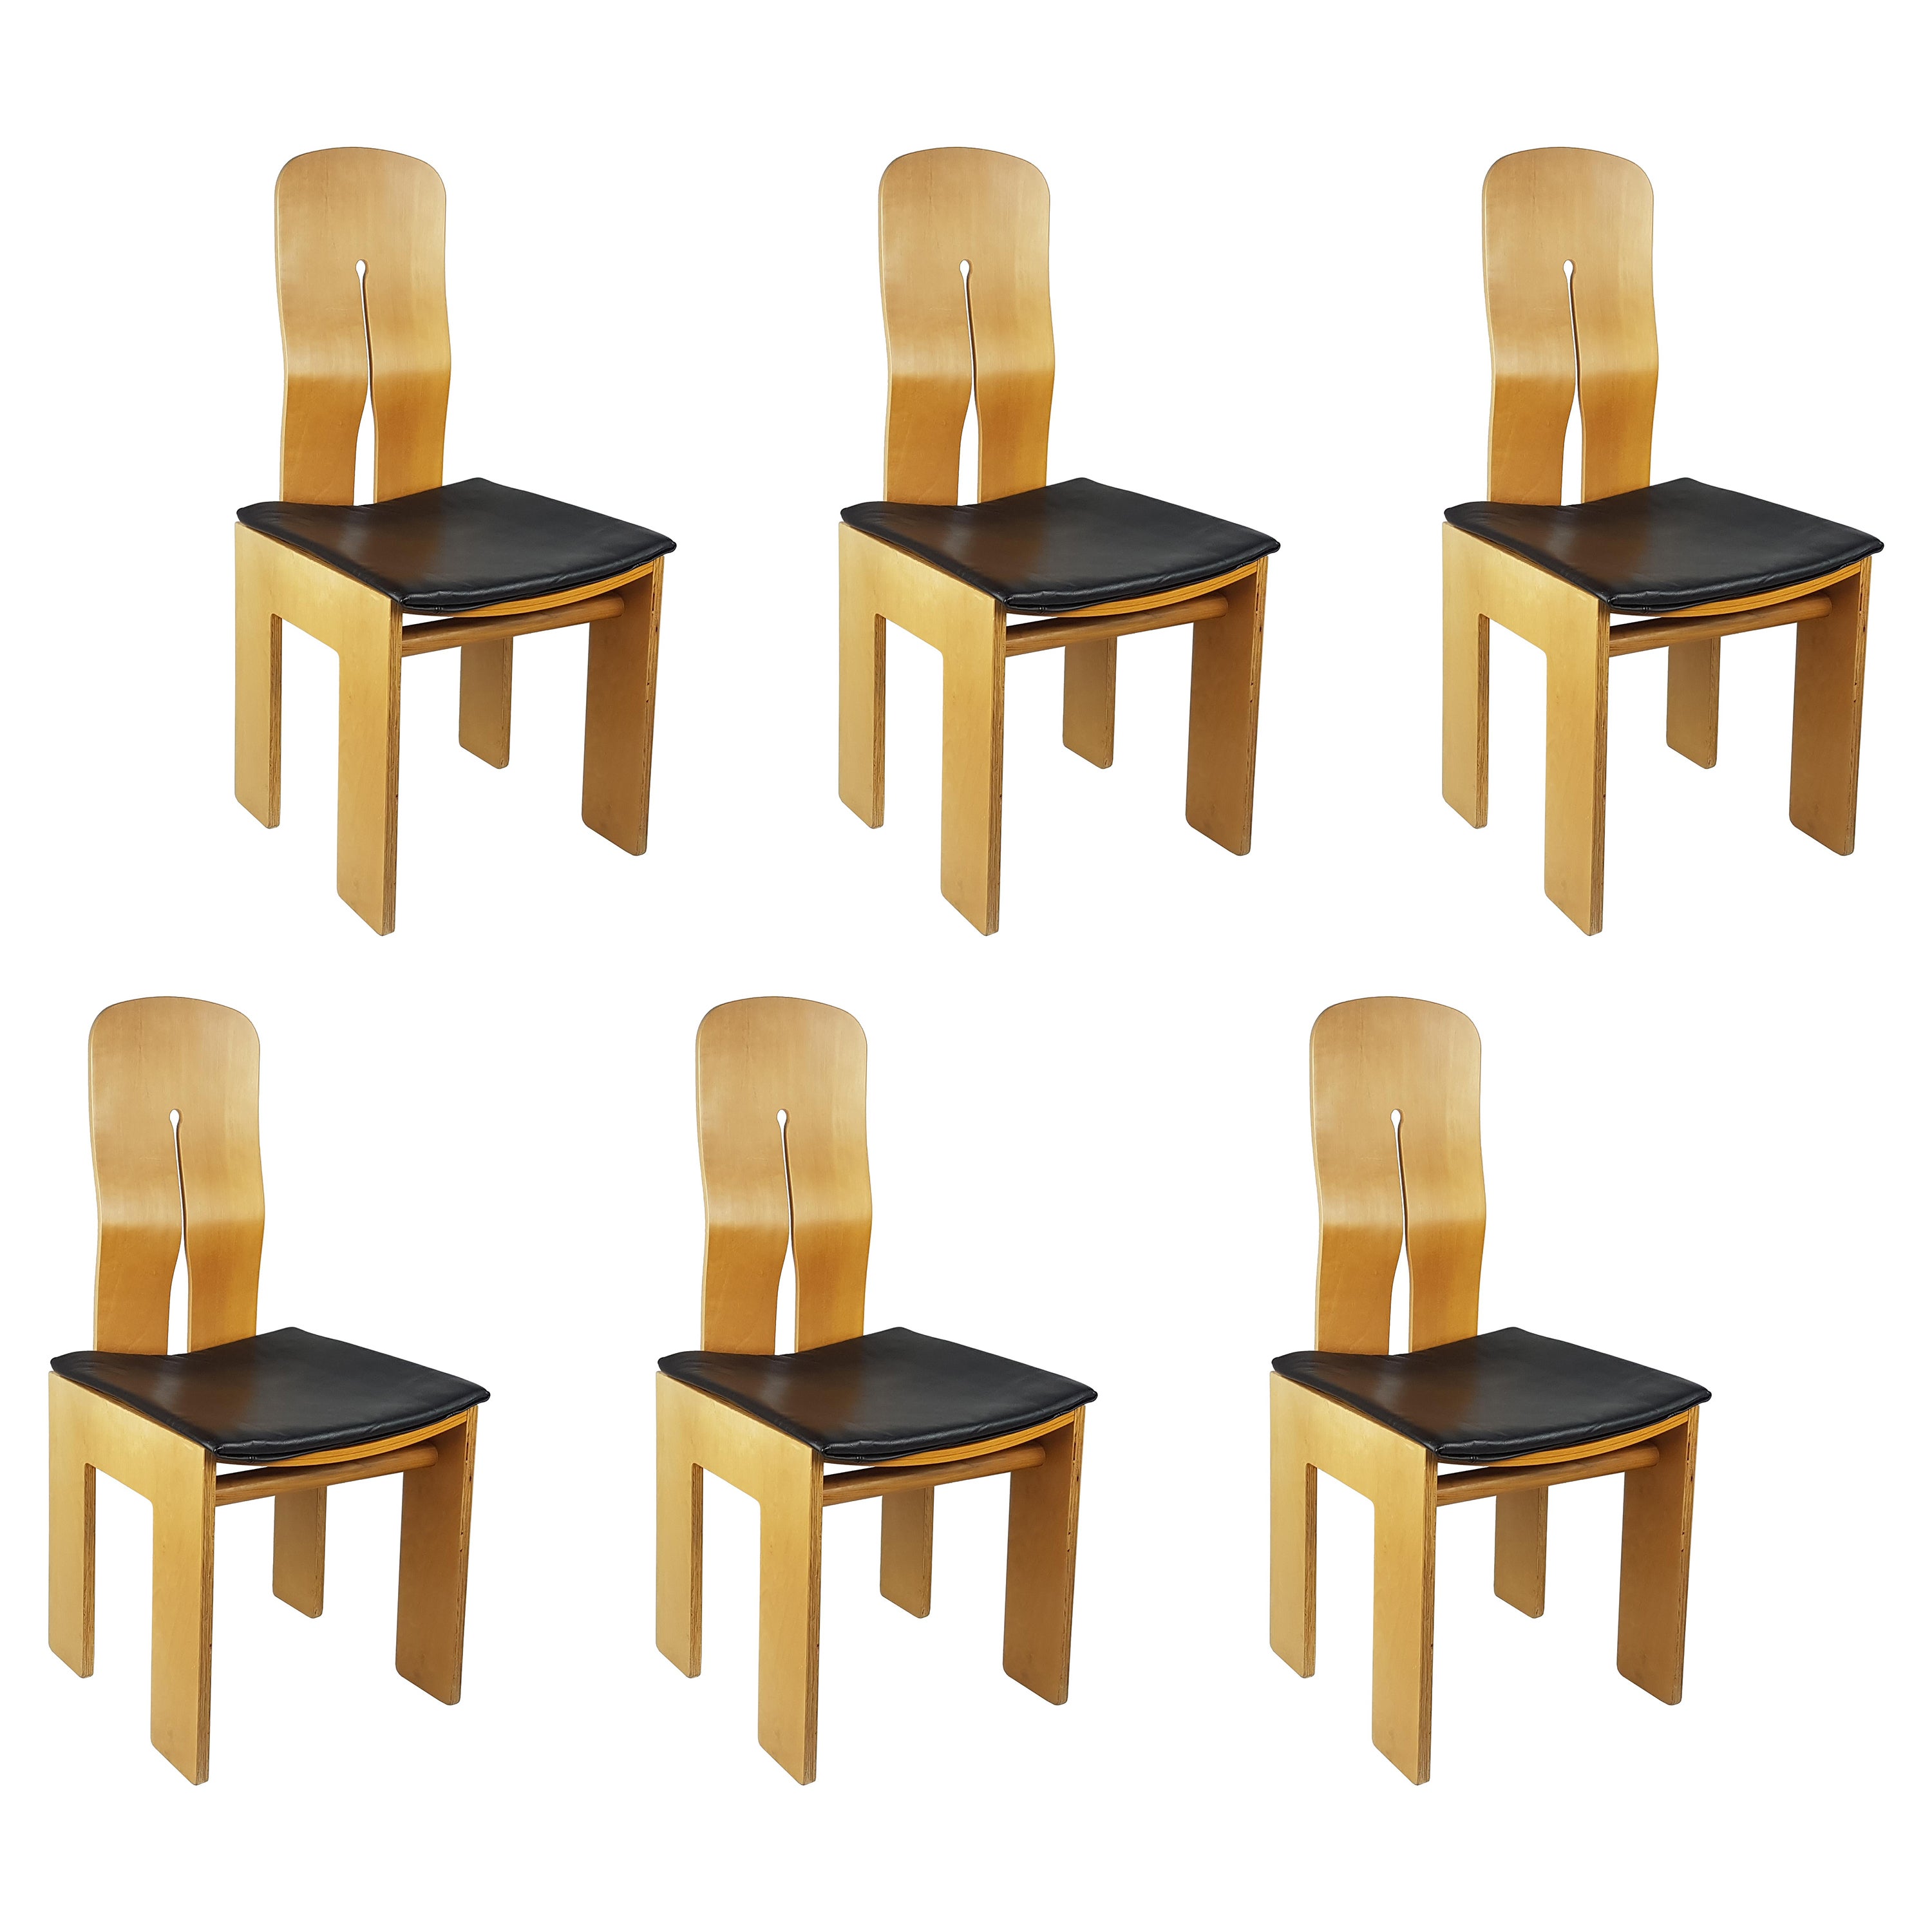 6 Black Leather and Wood M. 1937 765 Dining Chairs by Carlo Scarpa for Bernini